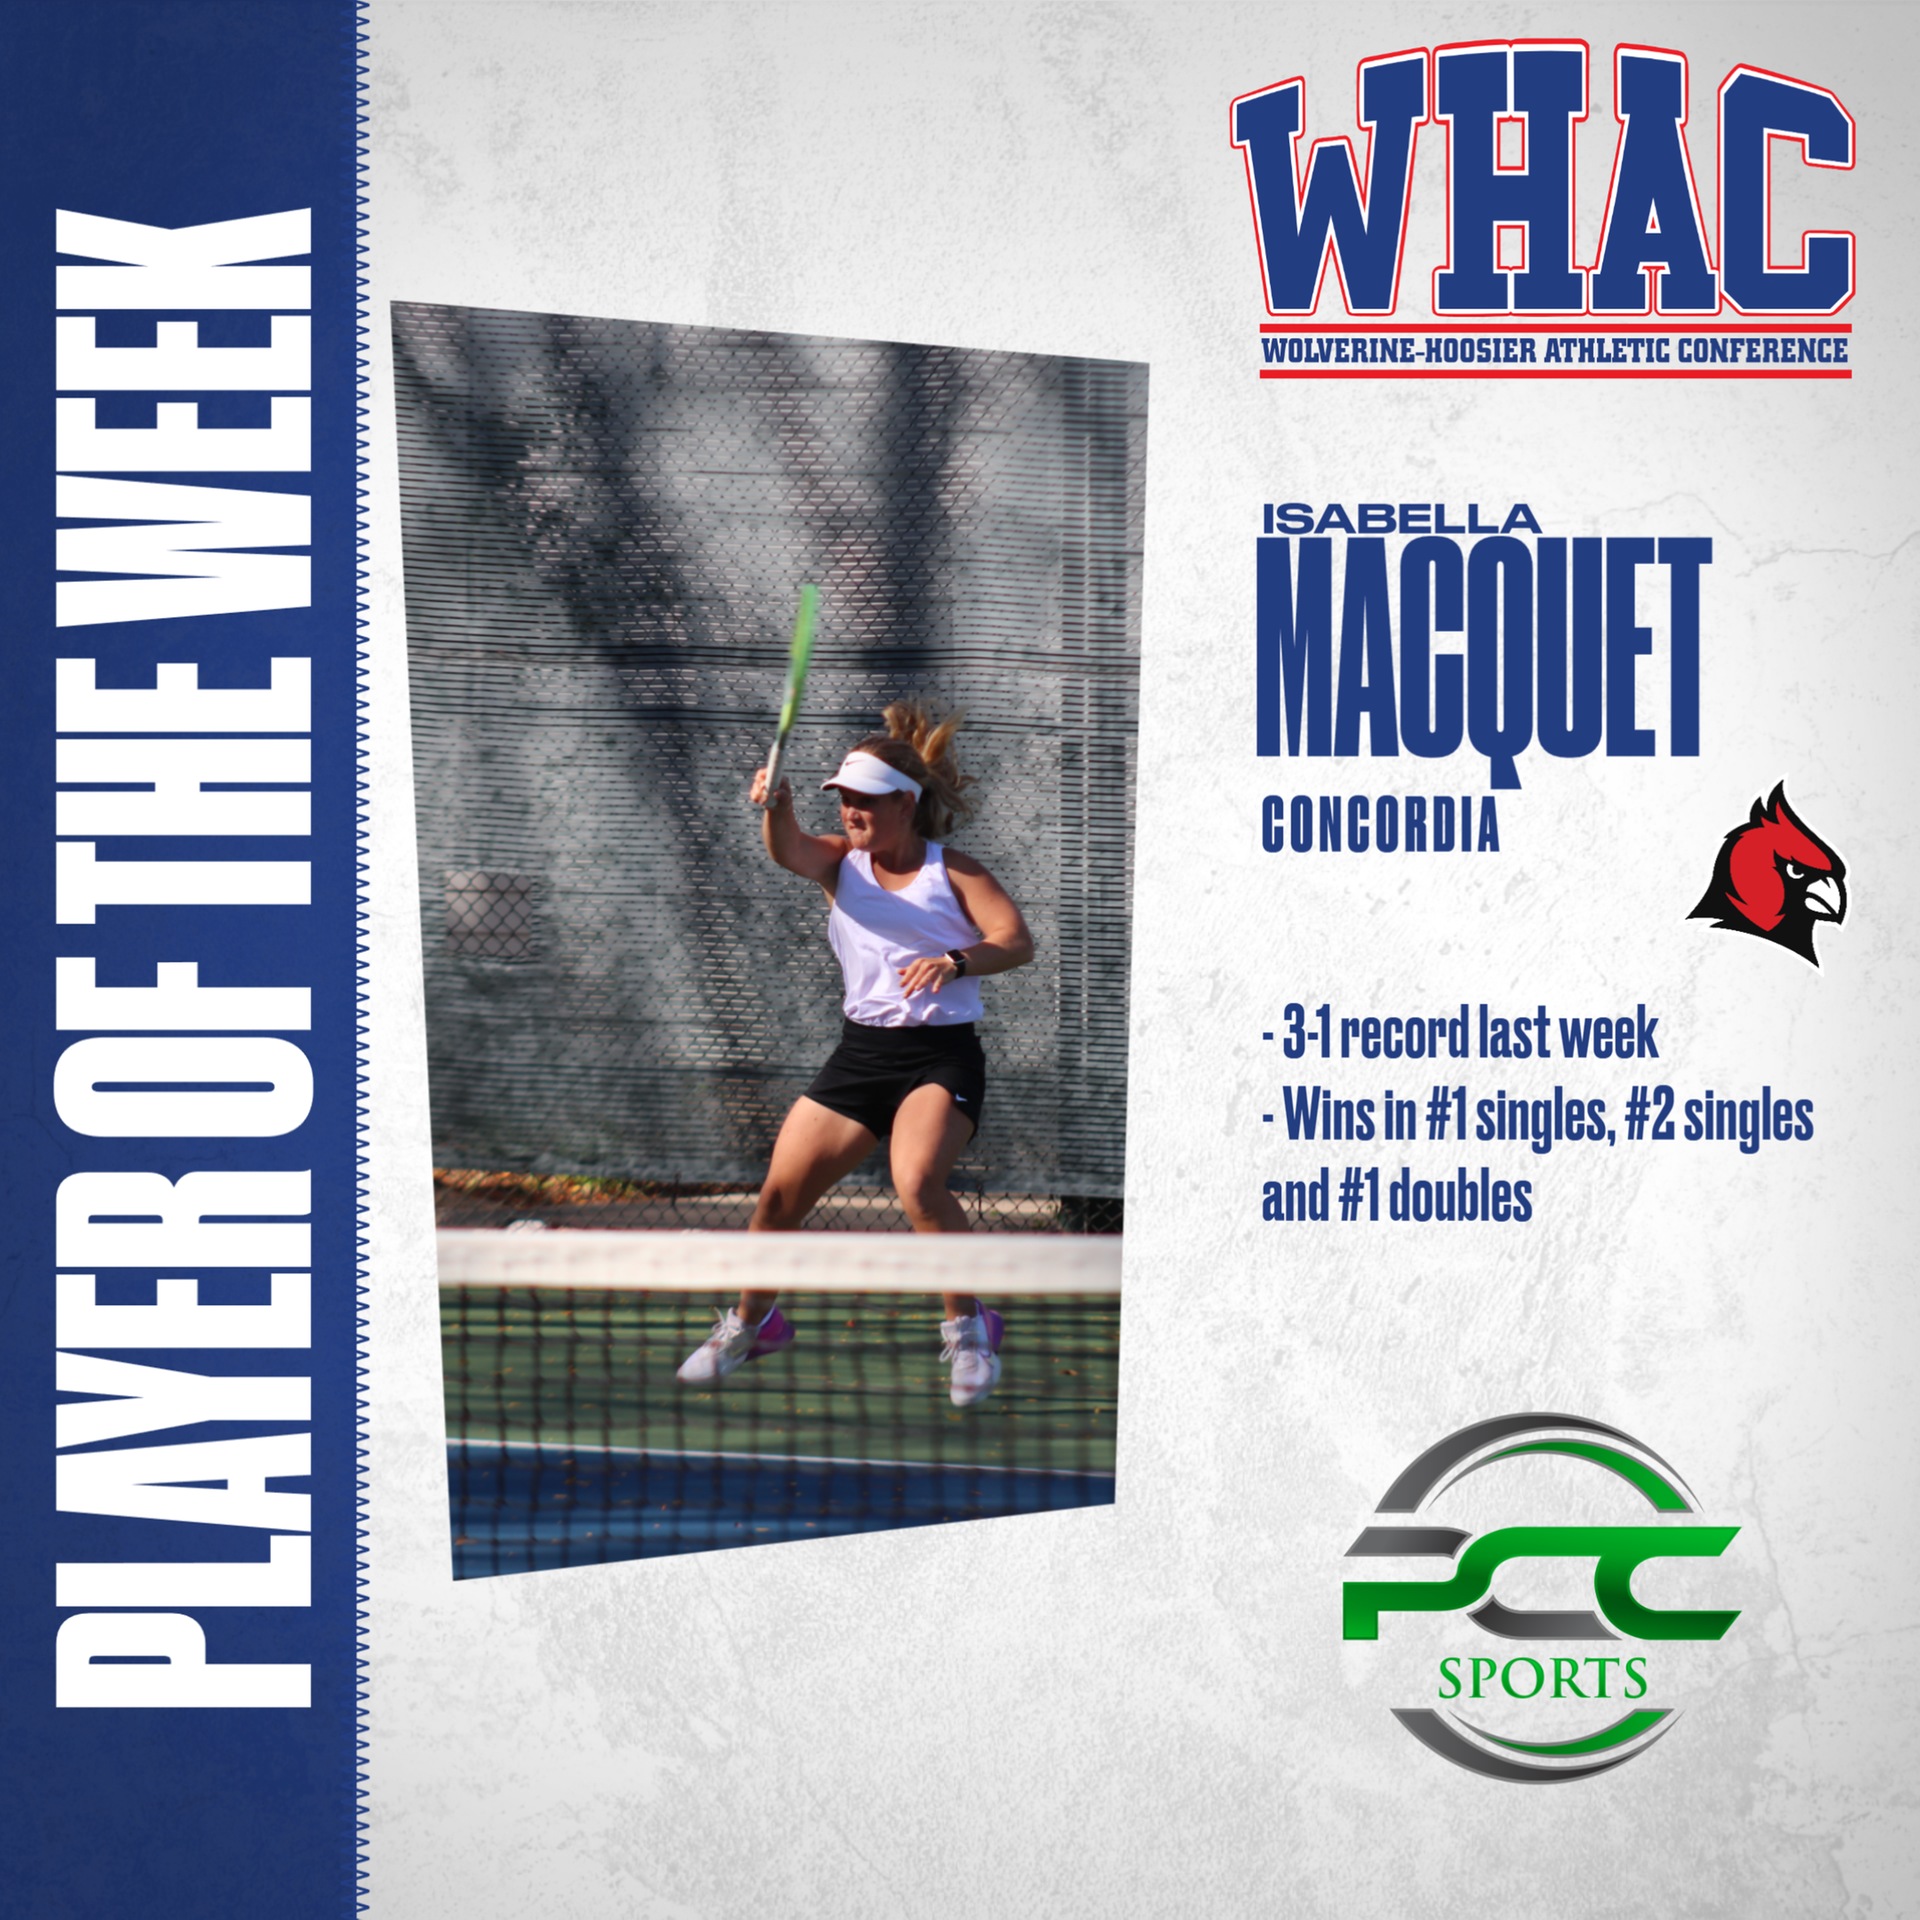 Concordia's Macquet Repeats as Player of the Week